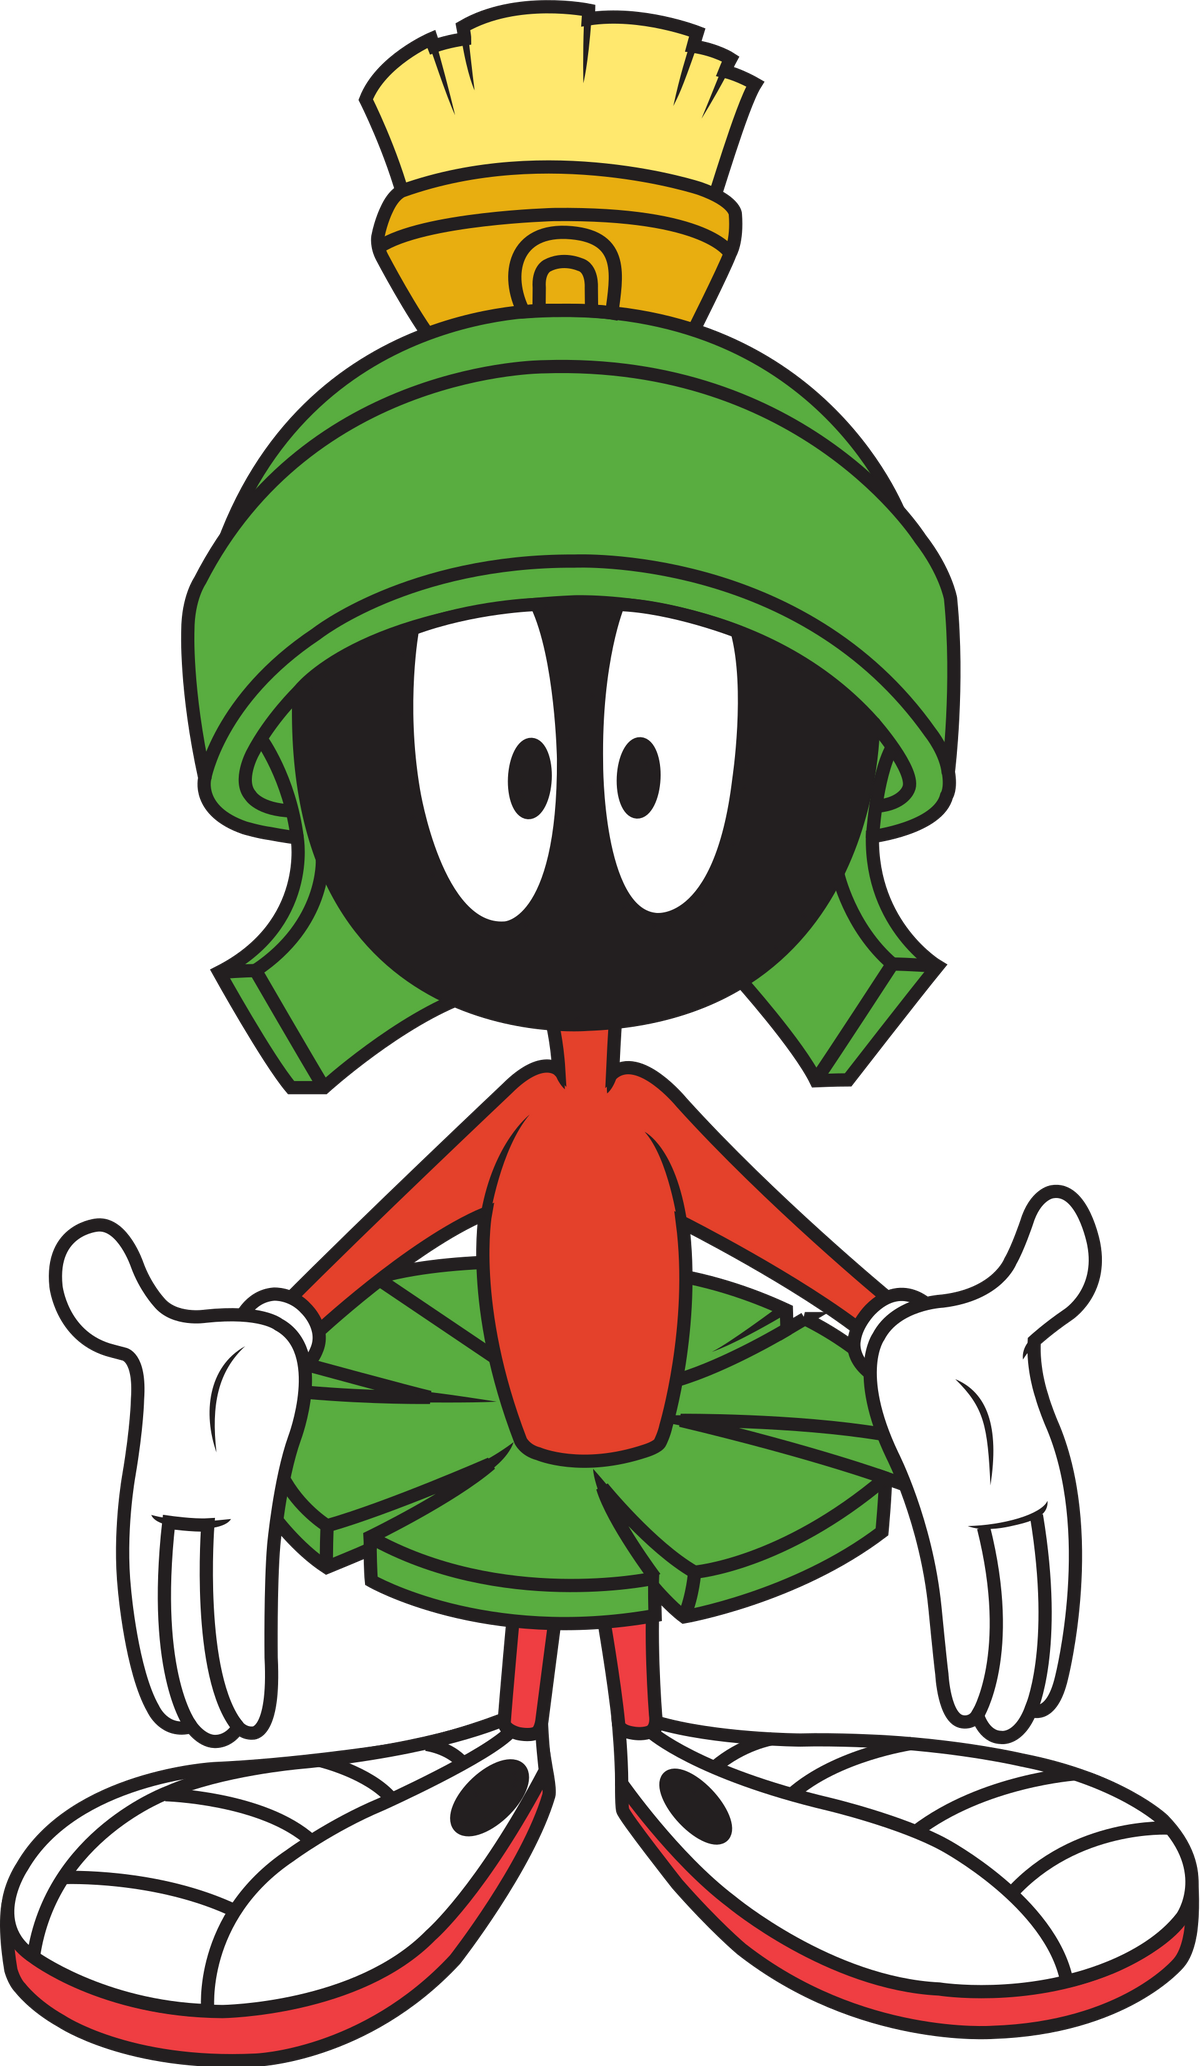 Marvin the Martian 9